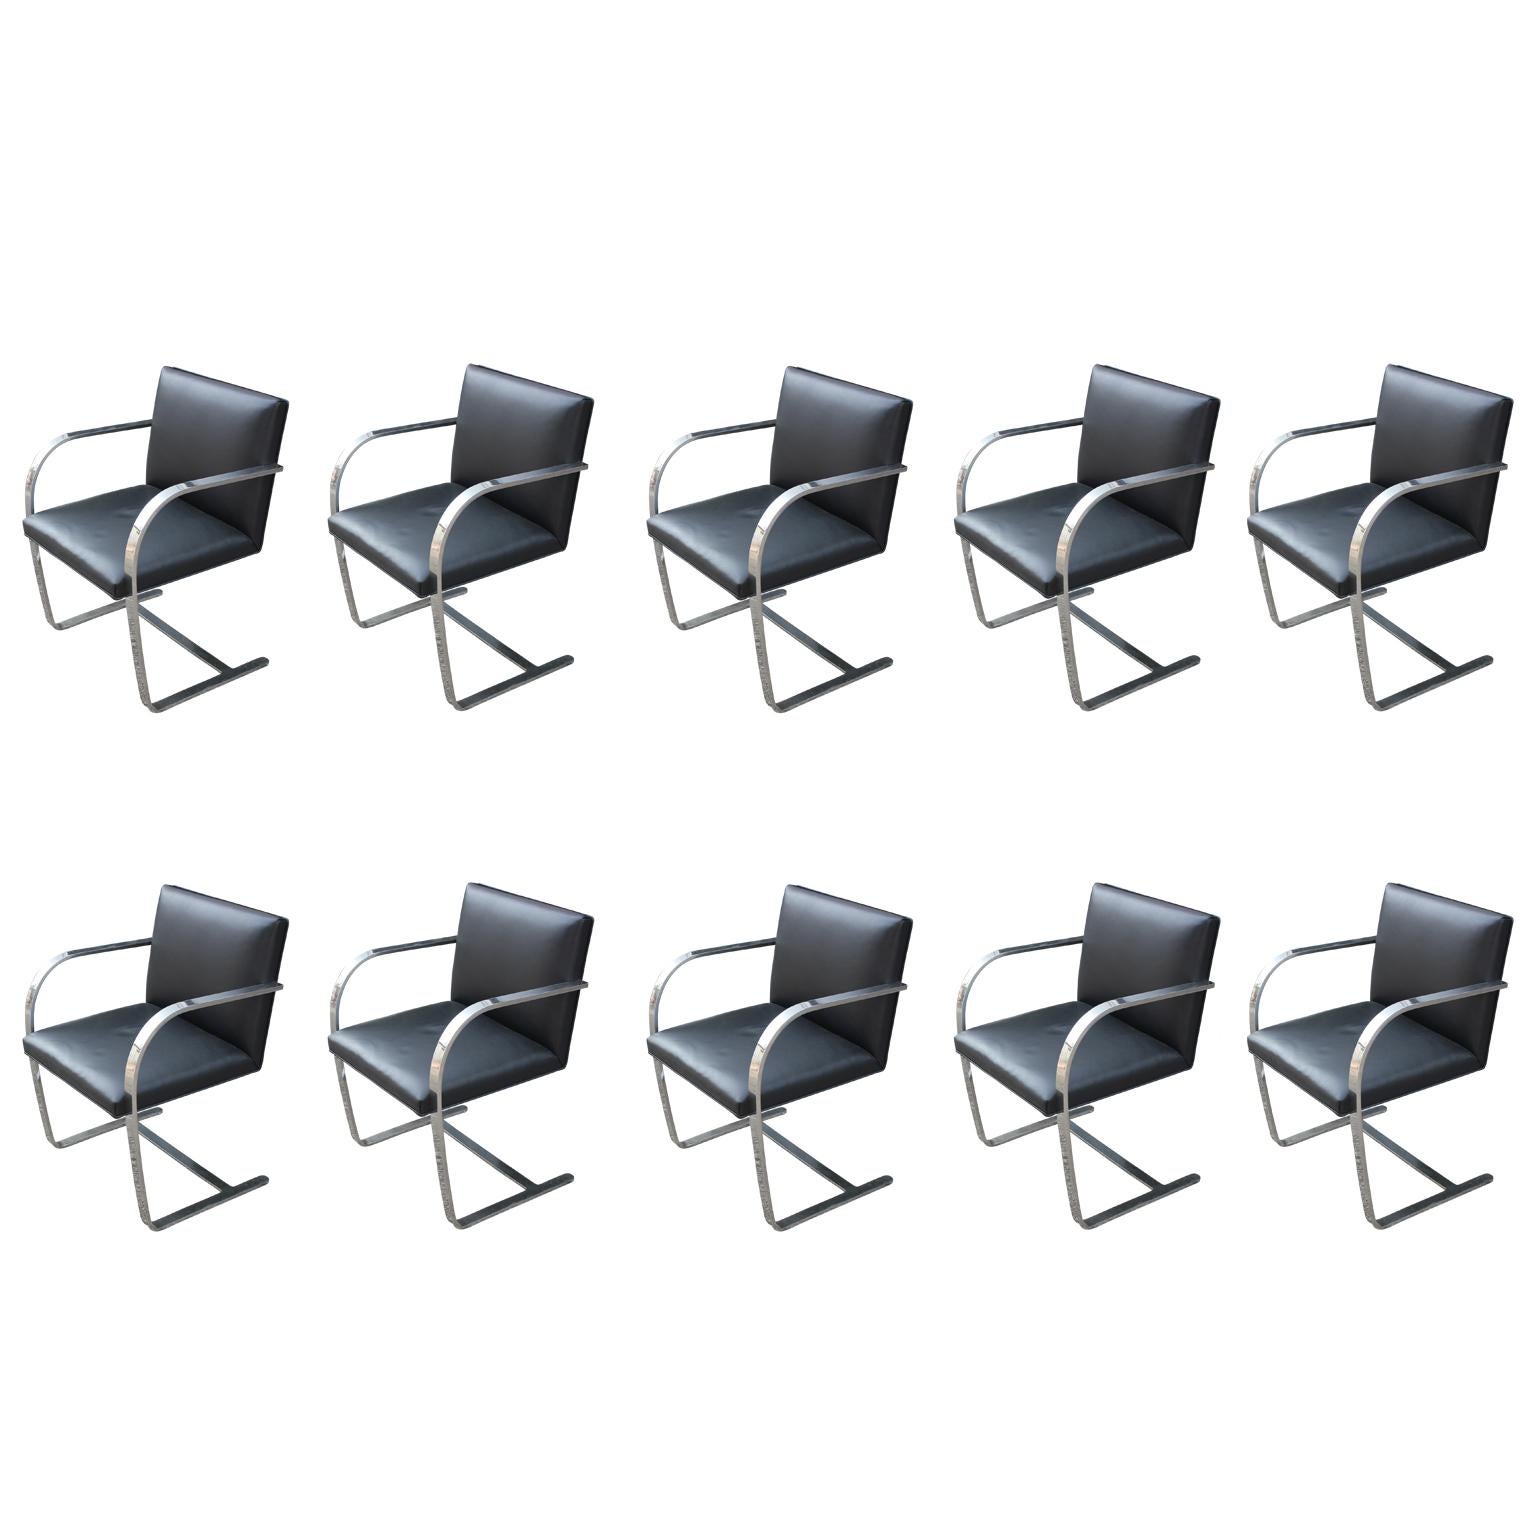 Set of 10 Modern Mies Van Der Rohe for Knoll Flat Bar Chrome Brno Dining Chairs